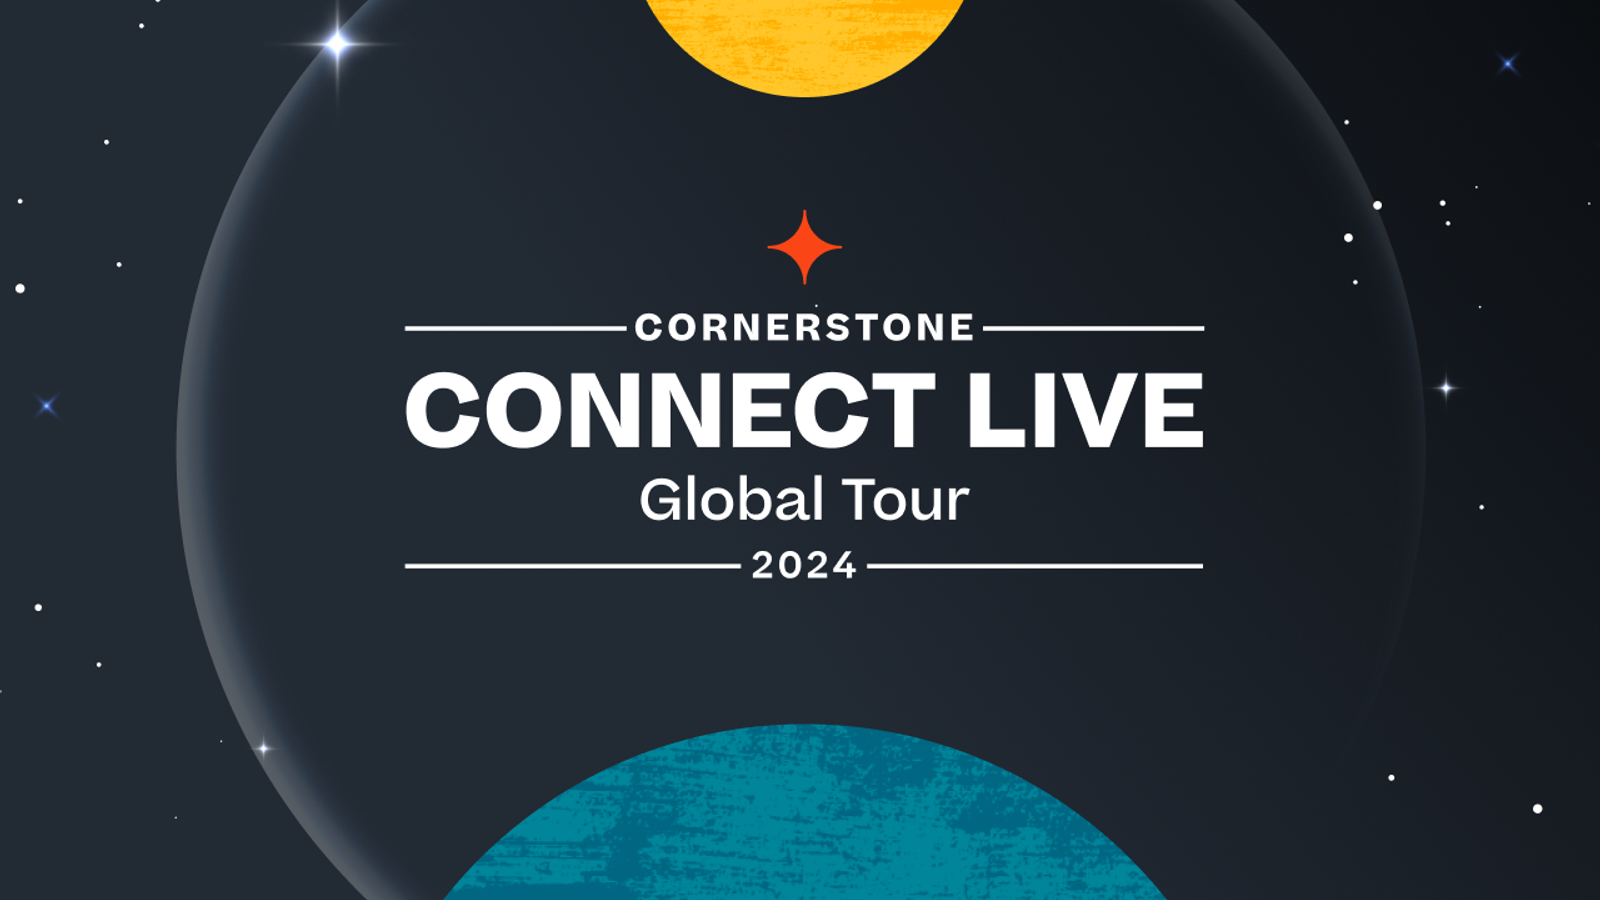 Cornerstone Connect Live Global Tour 2024